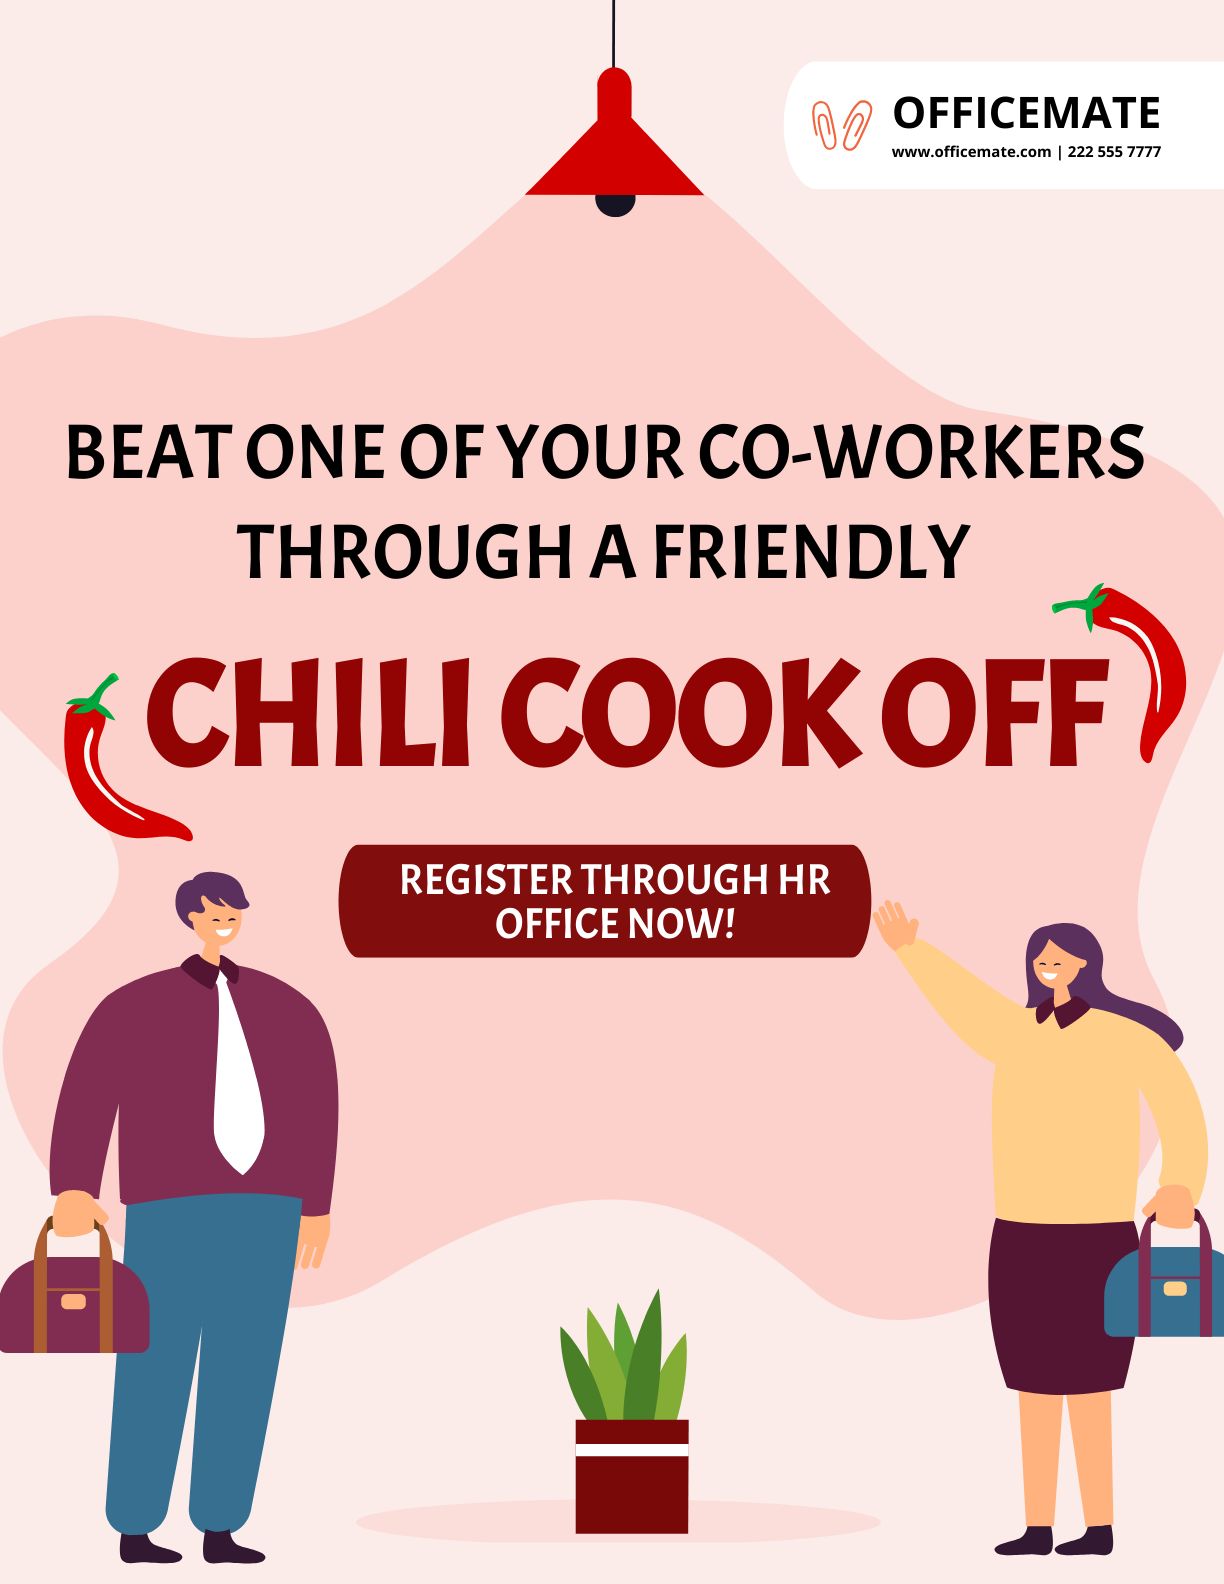 Free Office chili cook off flyer